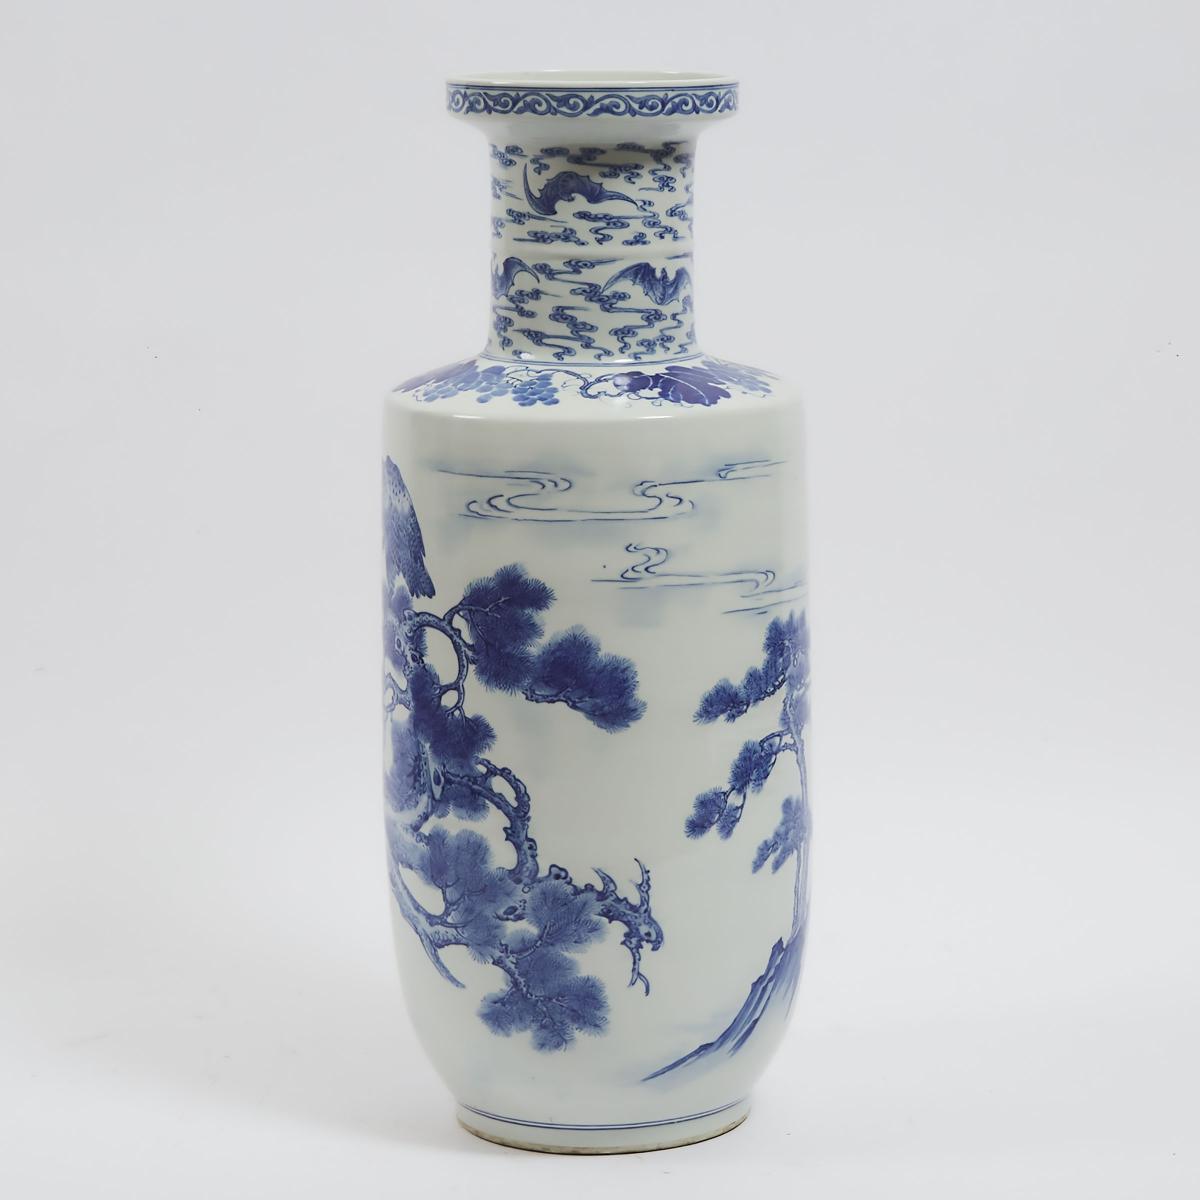 A Large Blue and White 'Birds and Pine' Vase, Early to Mid 20th Century, 民国时期 青花'苍鹰劲松'纹纸槌大瓶, height - Image 2 of 3